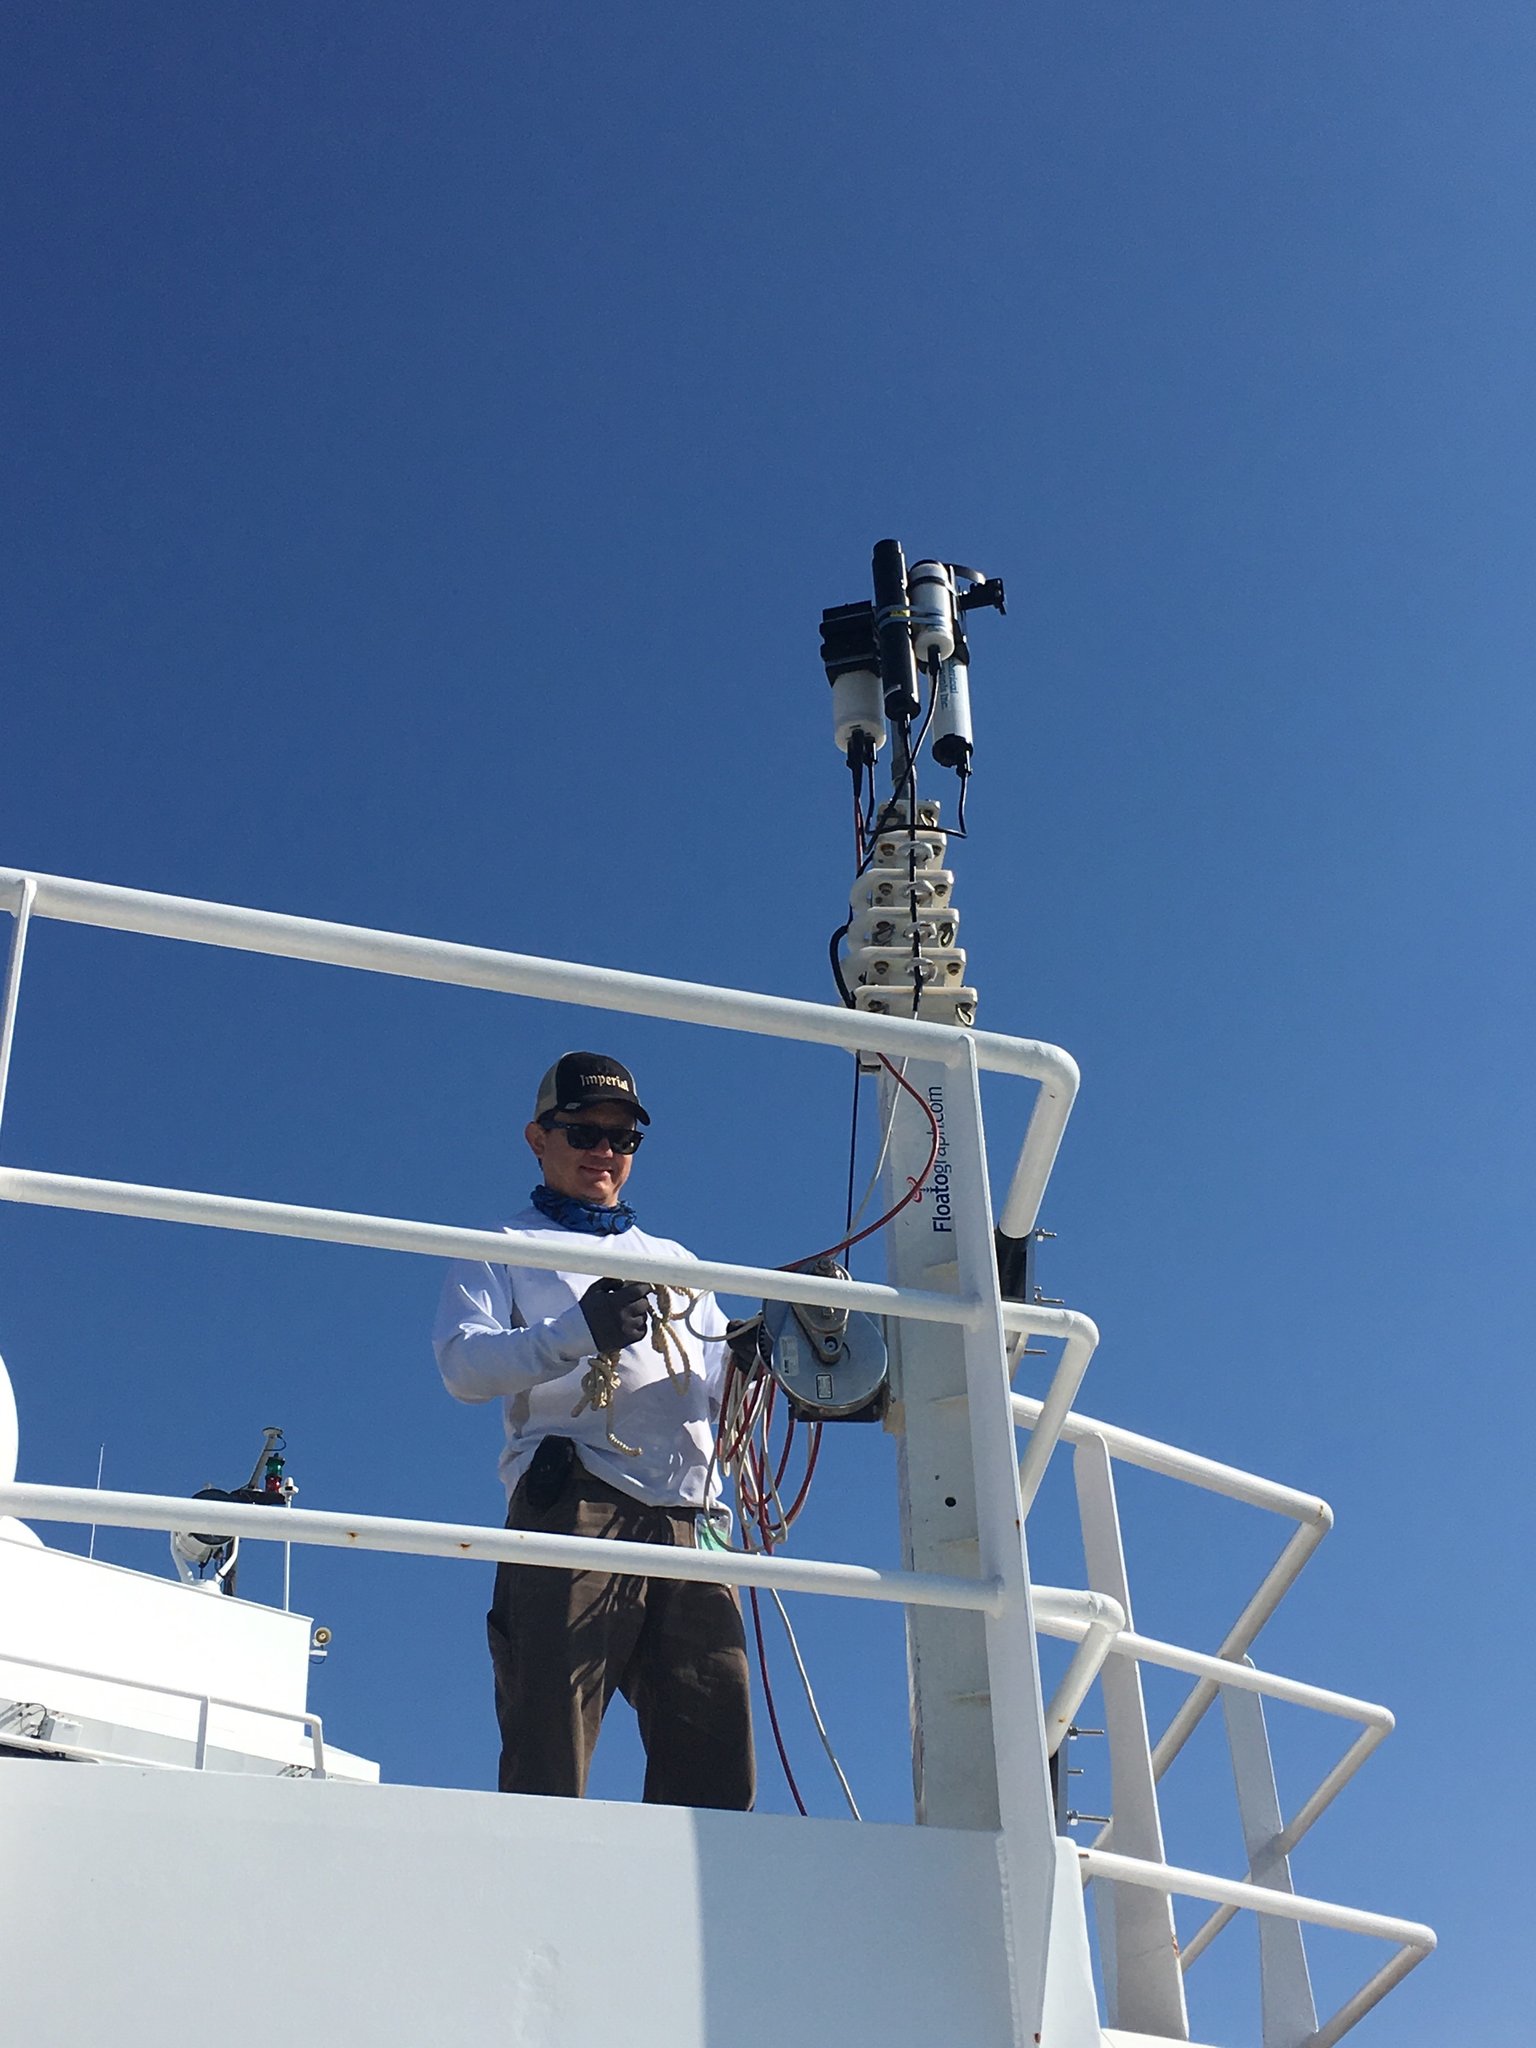 Ship-based radiometers (seen here attached to a deck rail) will collect hyperspectral data on ocean color. The hyperspectral measurements will be similar to those that will be collected during the PACE mission.